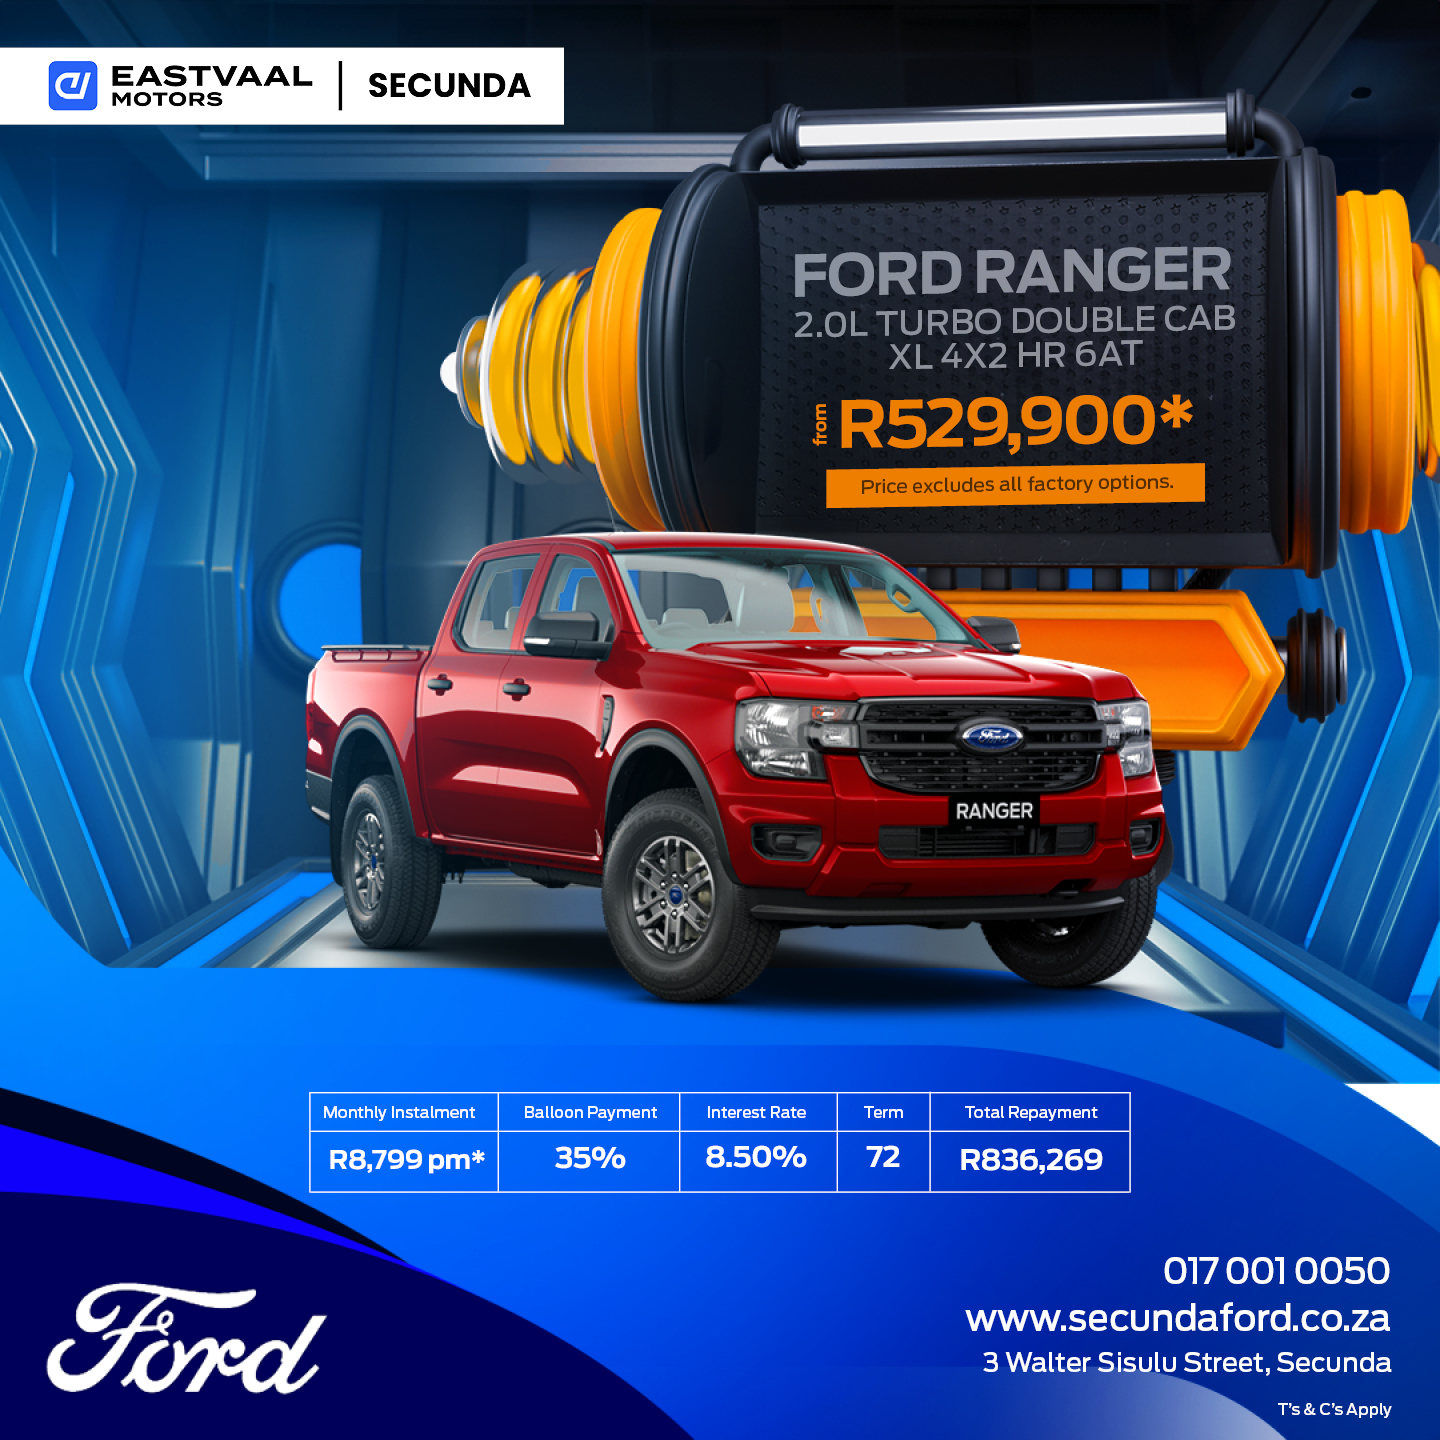 Ford Ranger 2.0L Turbo Double Cab XL 4×2 HR 6AT image from 